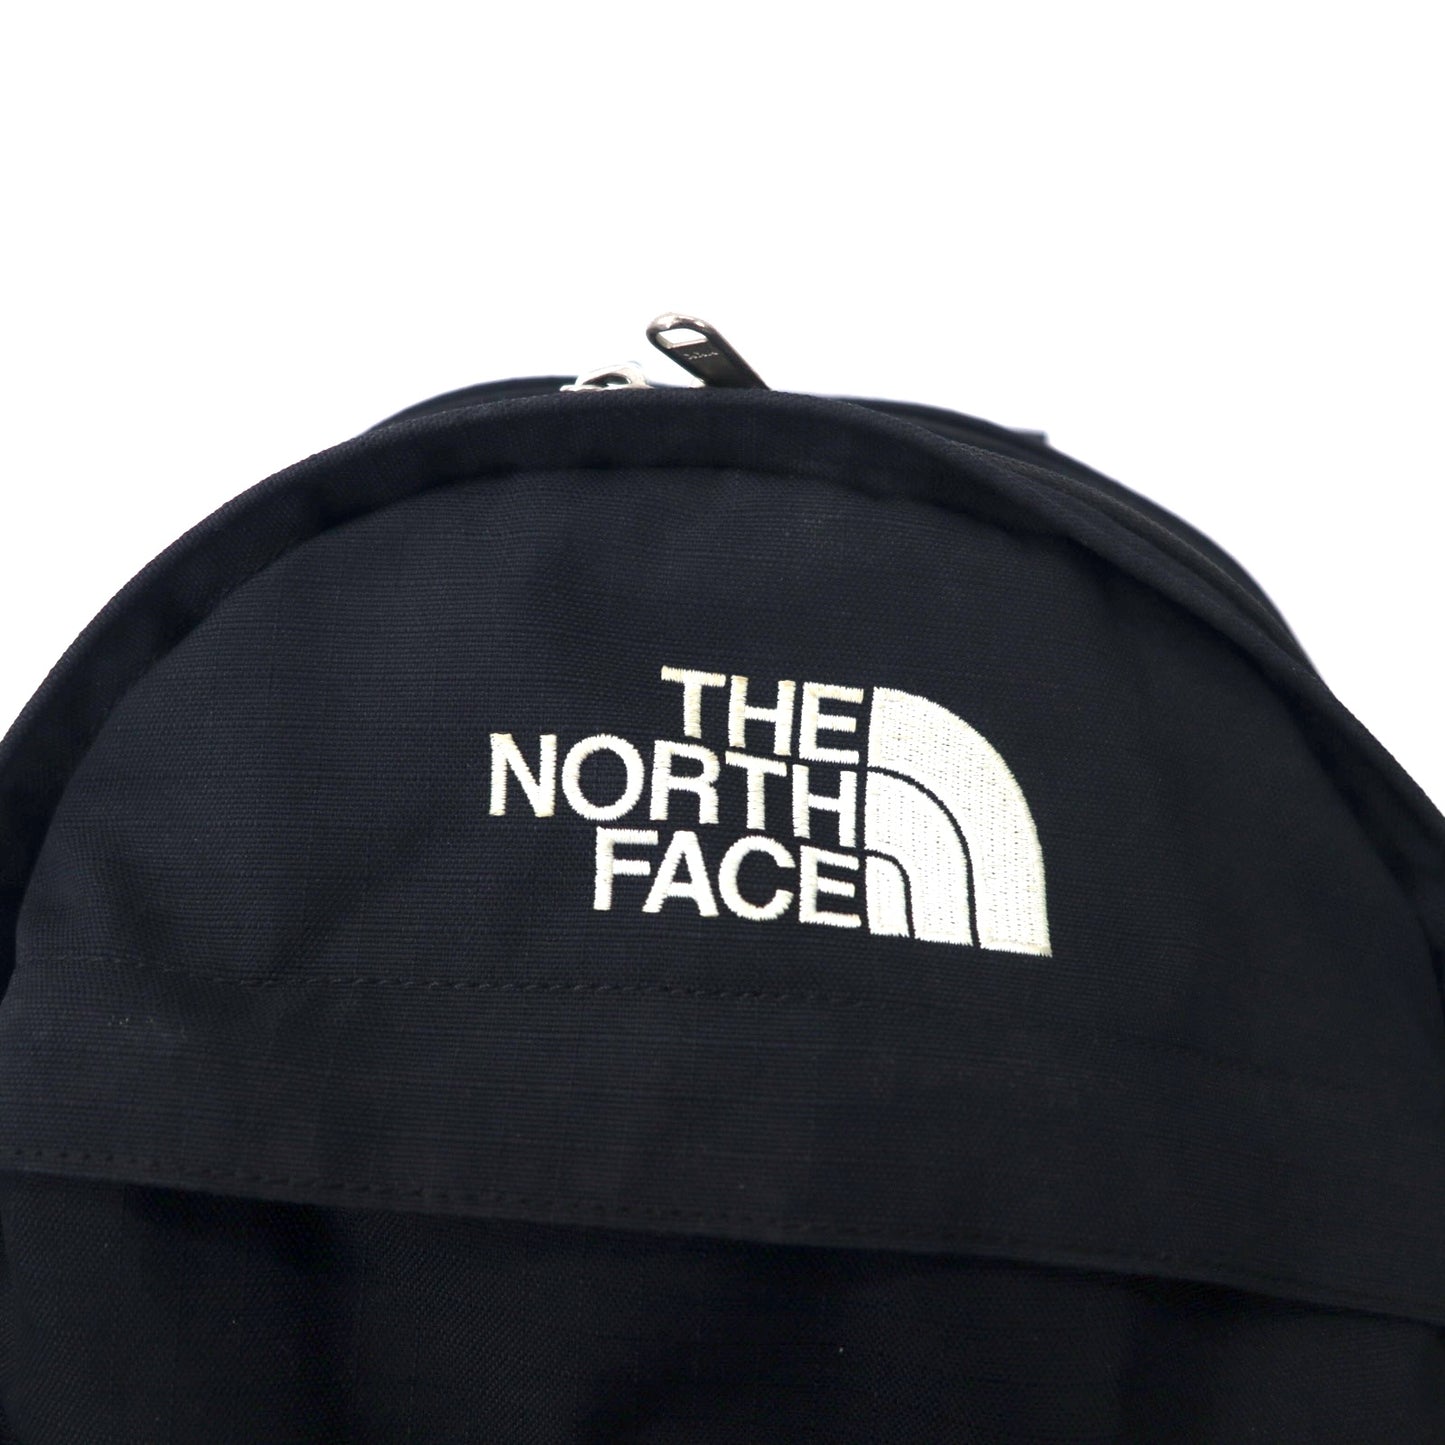 THE NORTH FACE ボーダーライン バックパック リュックサック 30L ブラック ナイロン ロゴ刺繍 BORDER LINE NM07711A